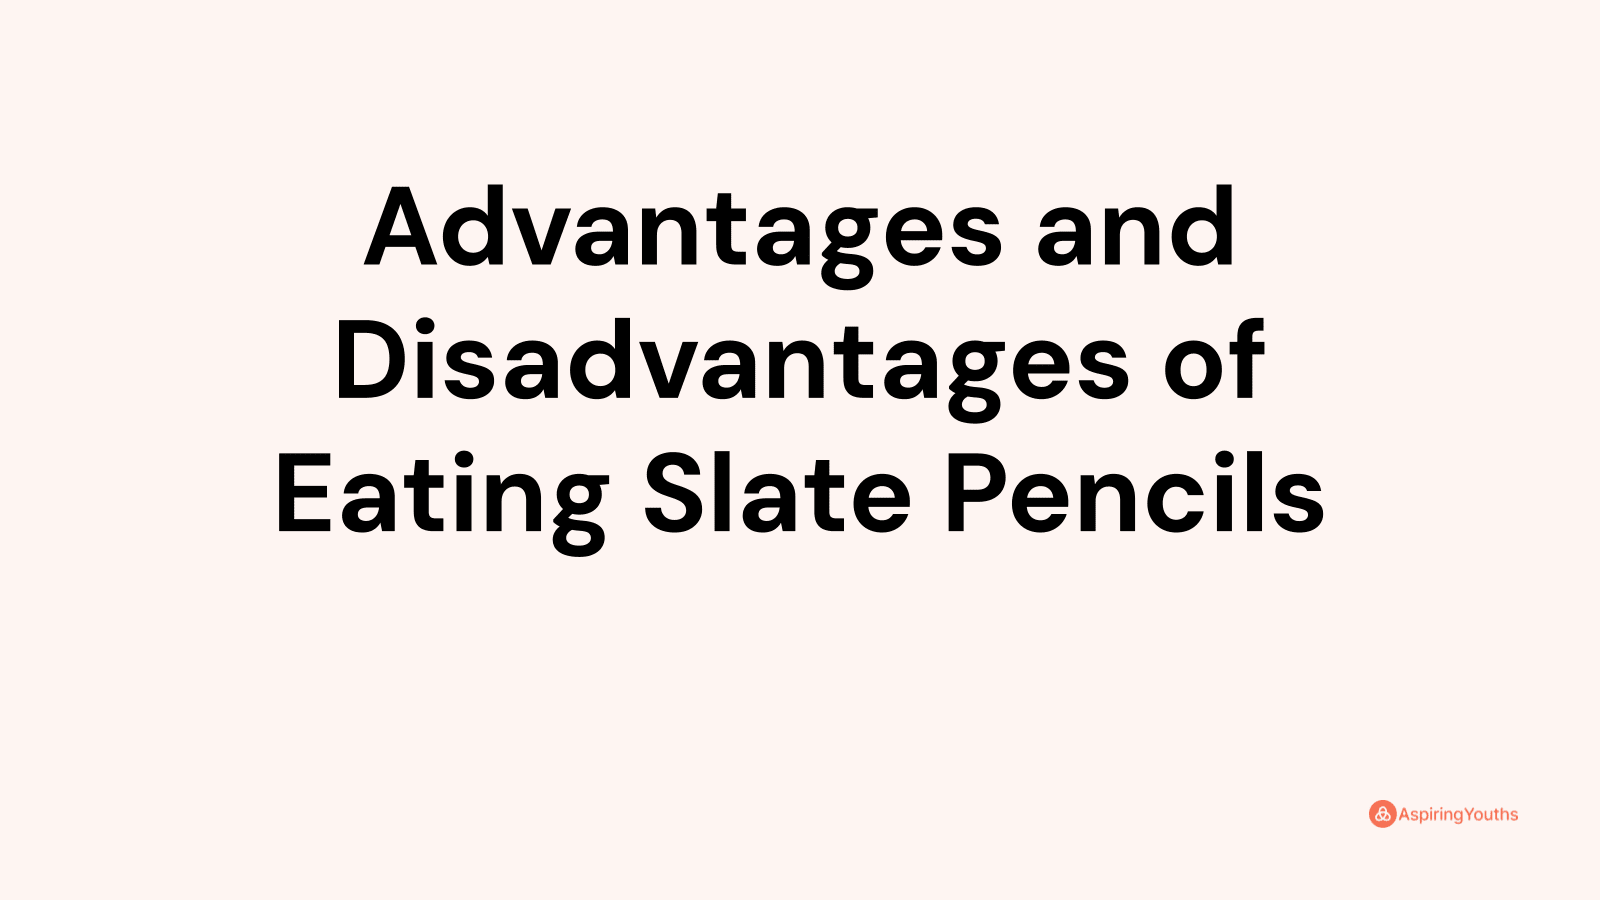 Advantages and disadvantages of Eating Slate Pencils